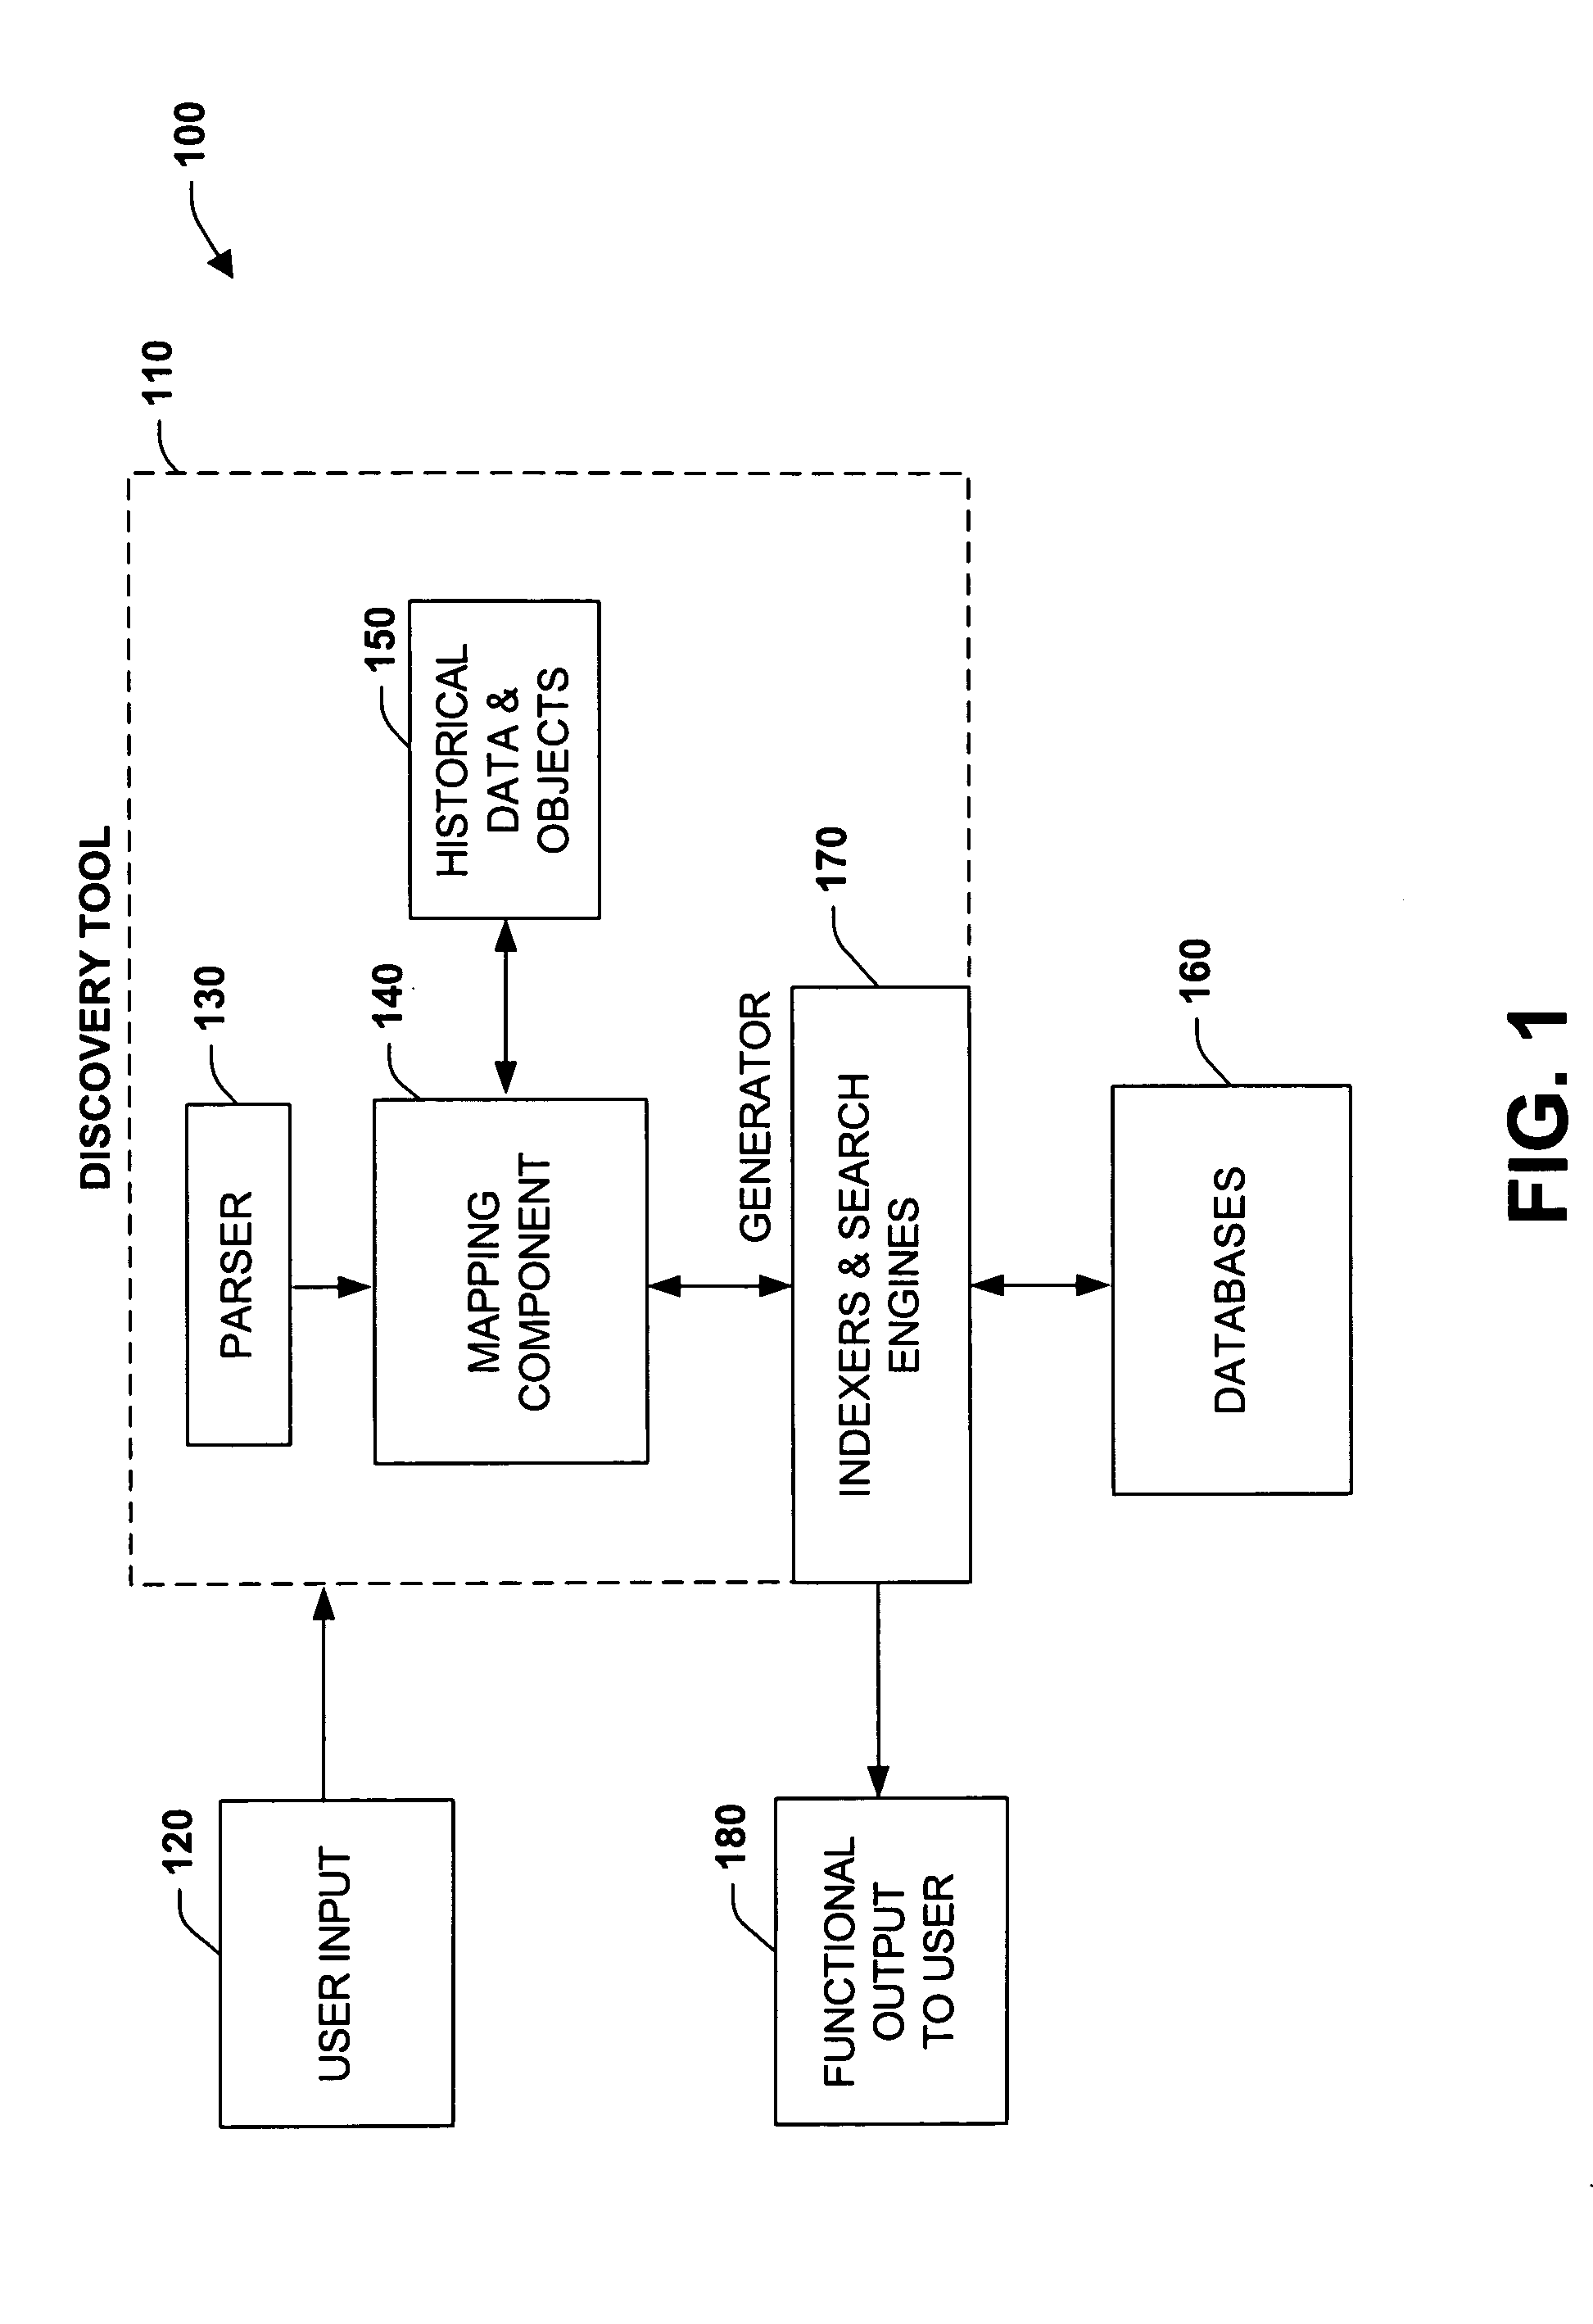 Systems and methods for improving information discovery